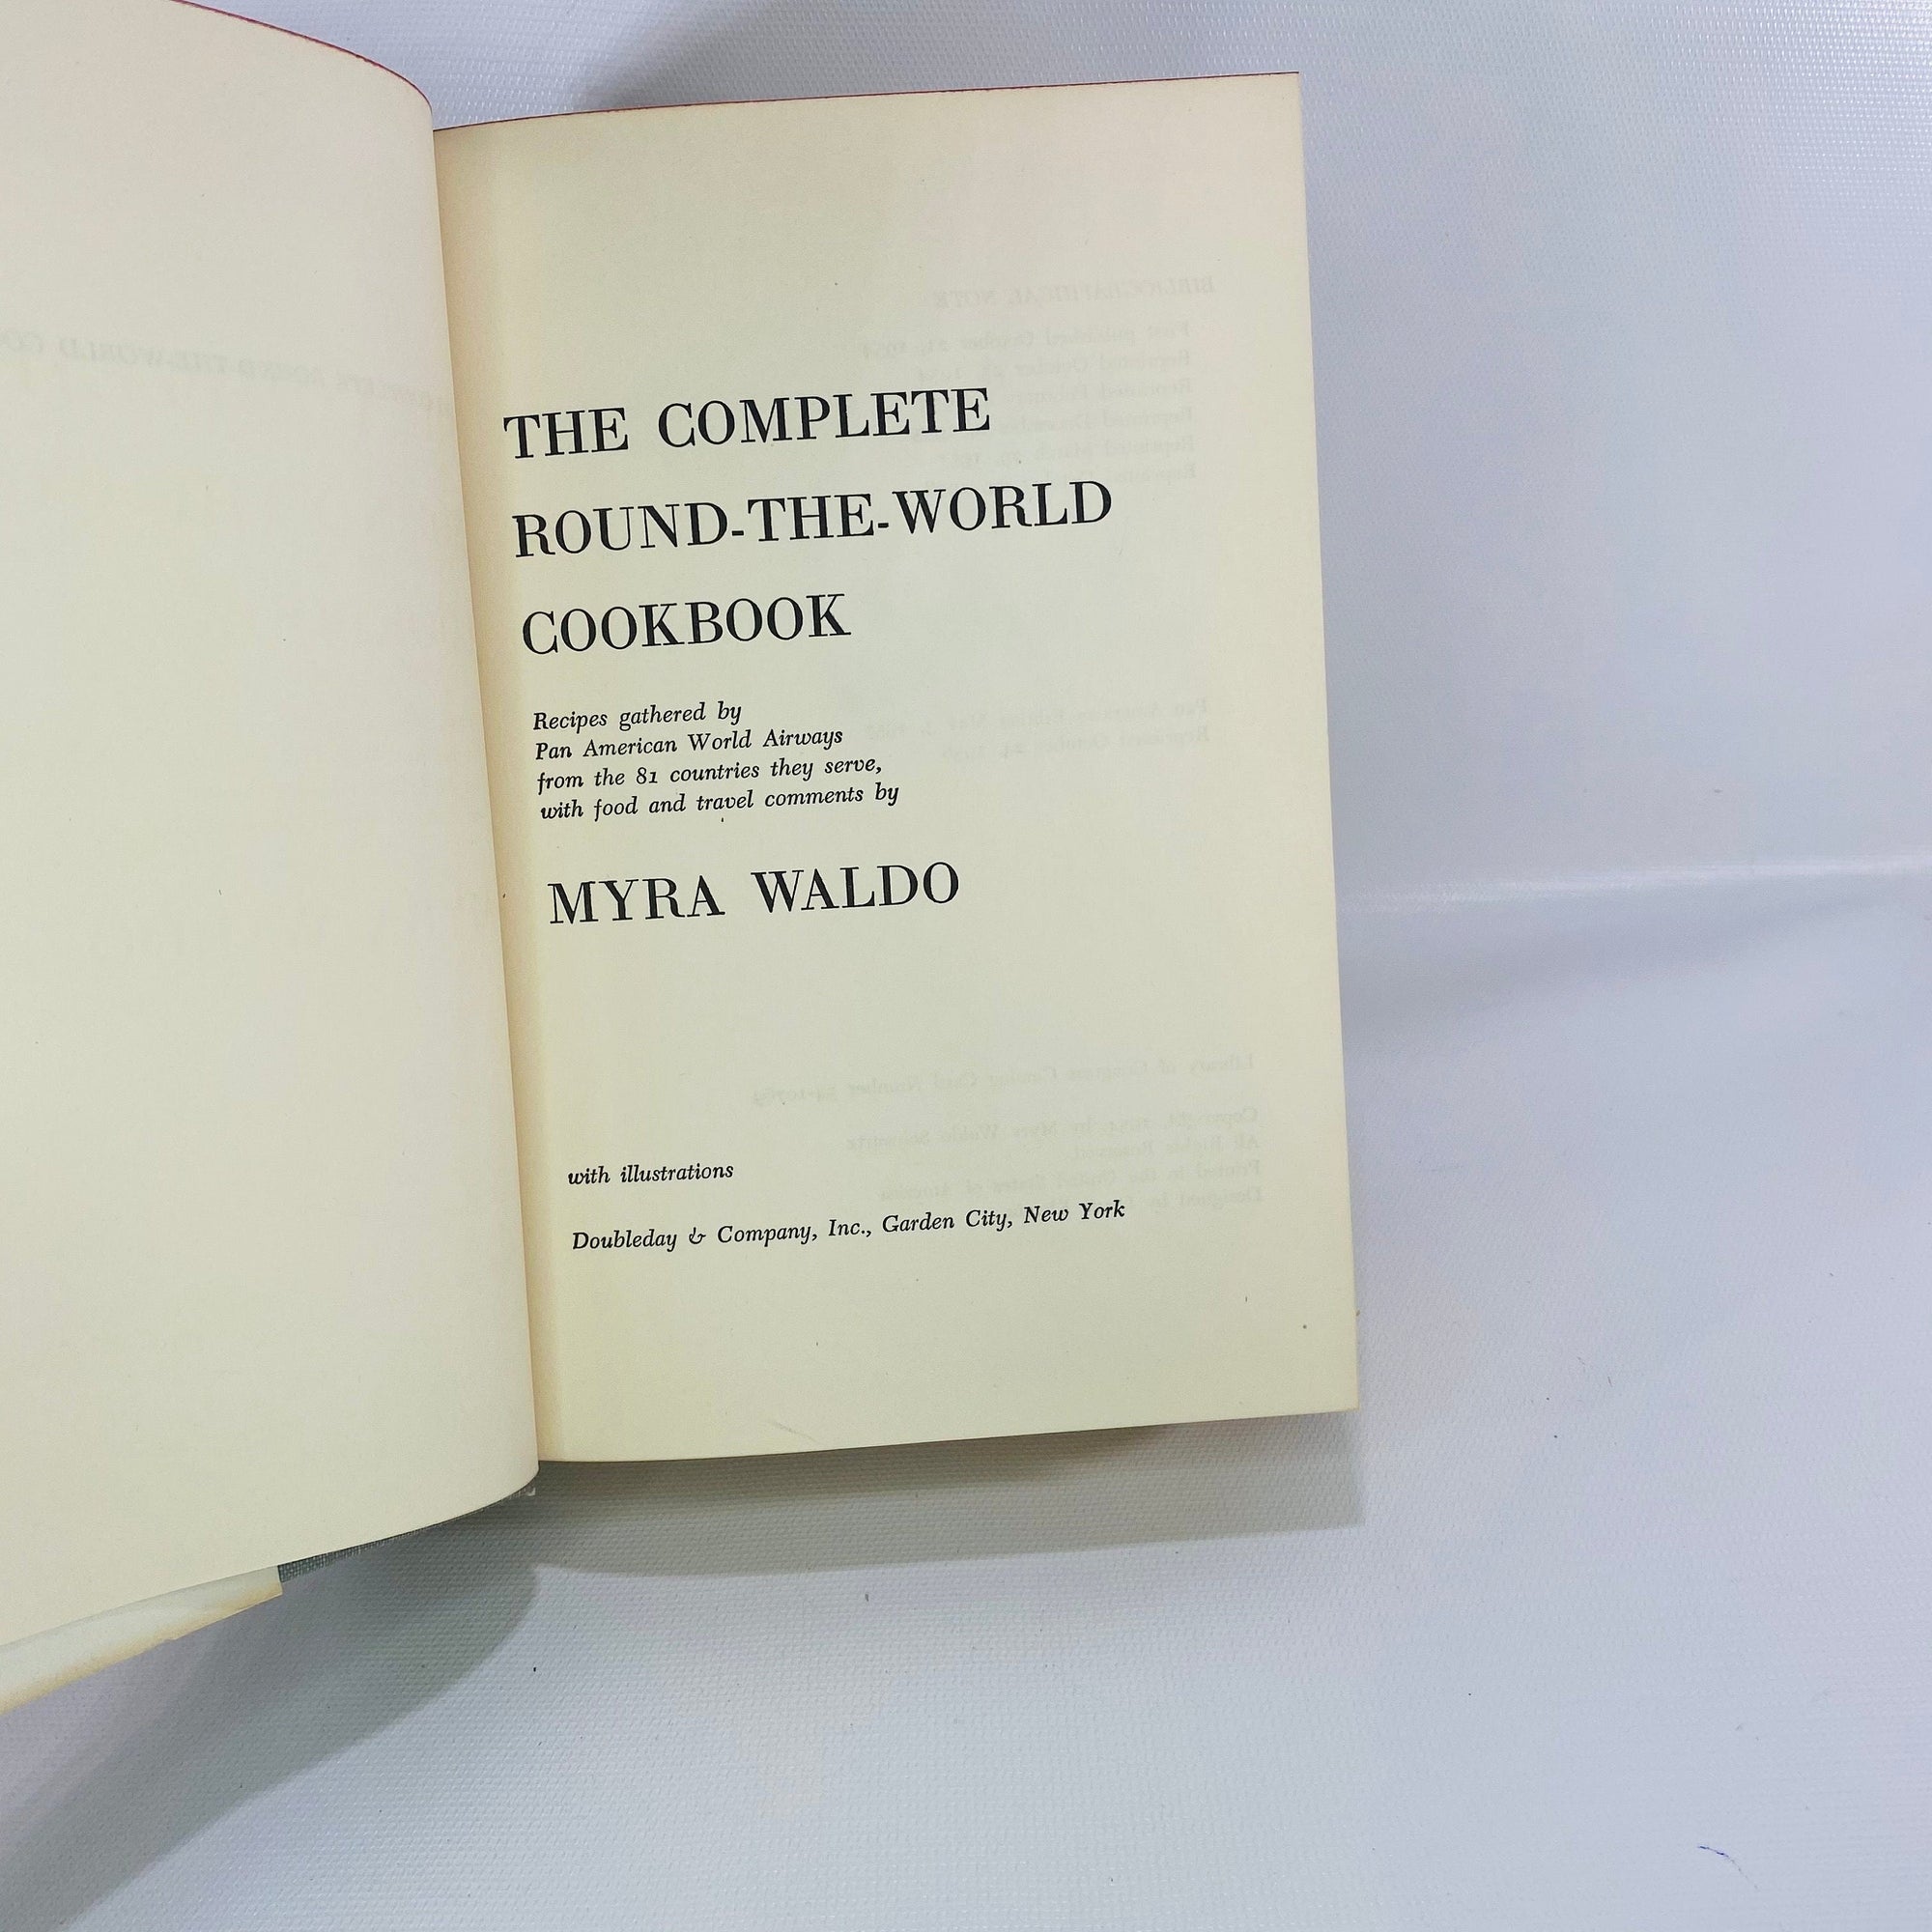 The Complete Round-the-World Cookbook by Myra Waldo 1958 Double day  Vintage Cookbook